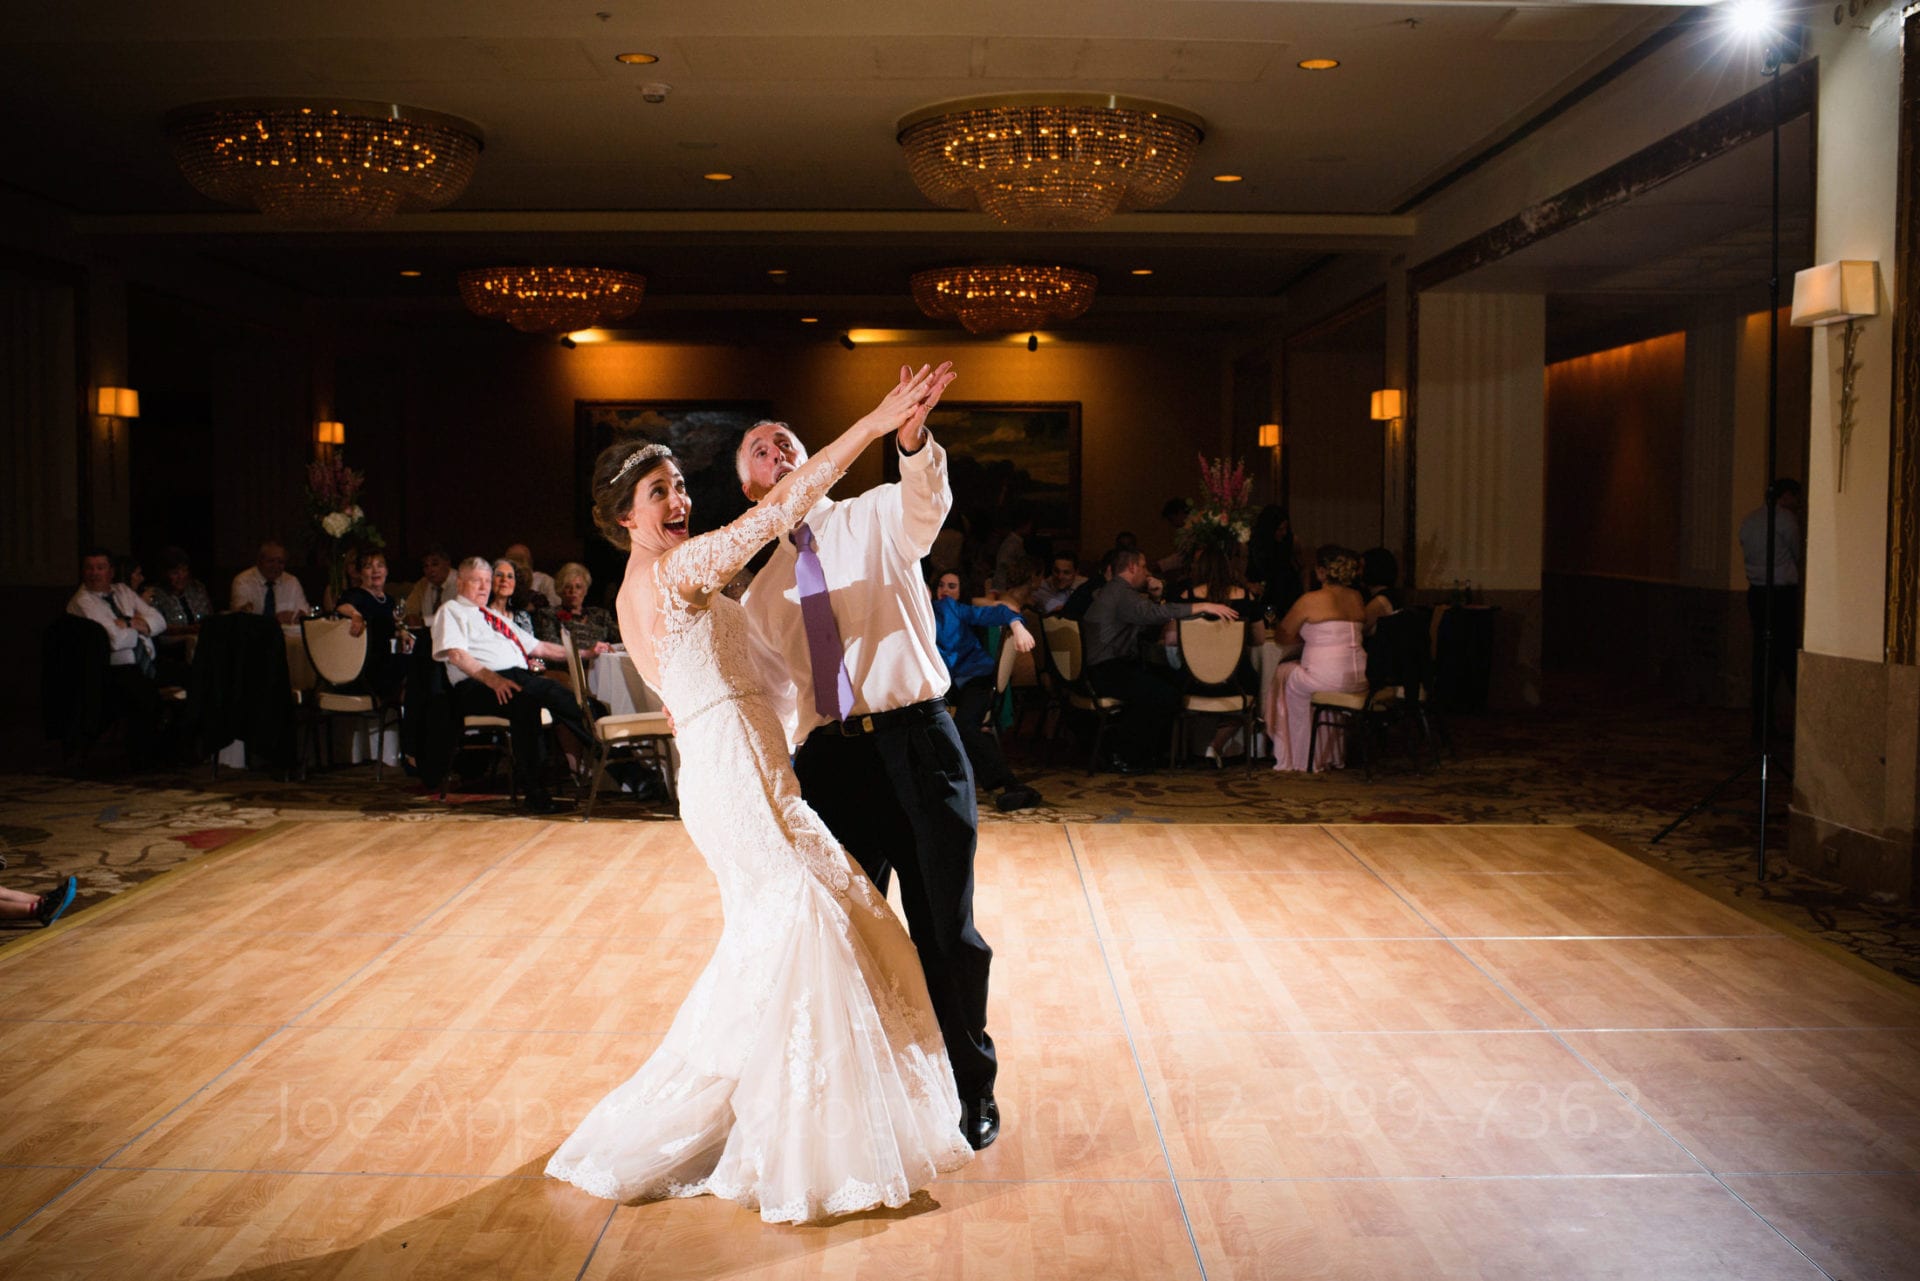 Father and daughter dance with a dramatic and humorous gesture looking skyward with their arms outstretched.